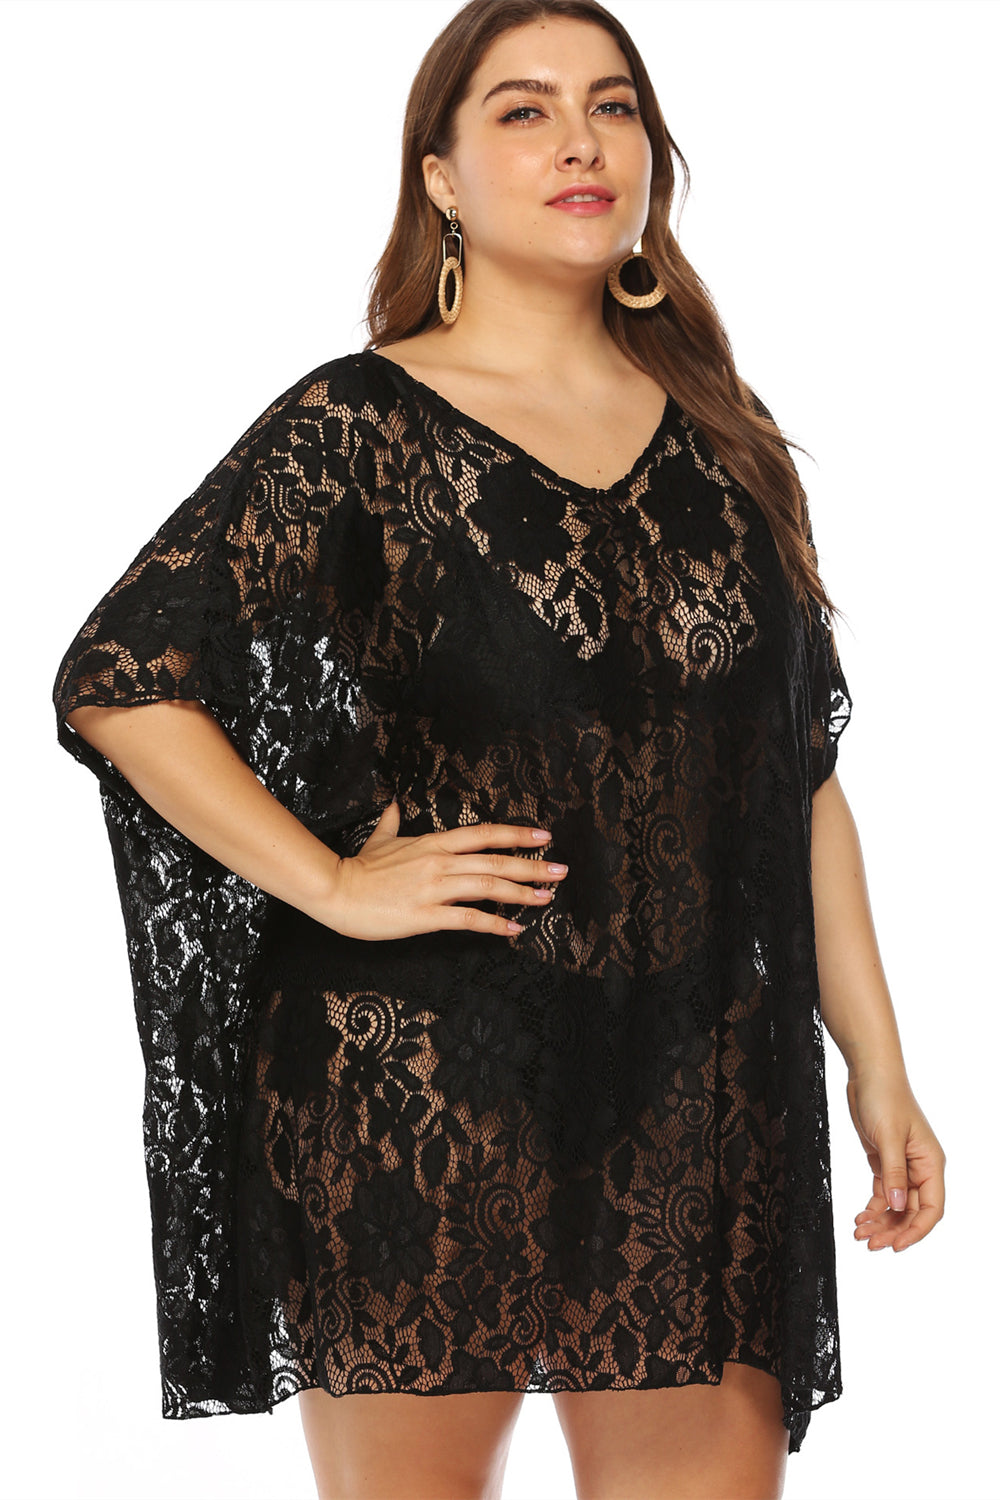 Black Lace Plus Size Half Sleeve Cover Up